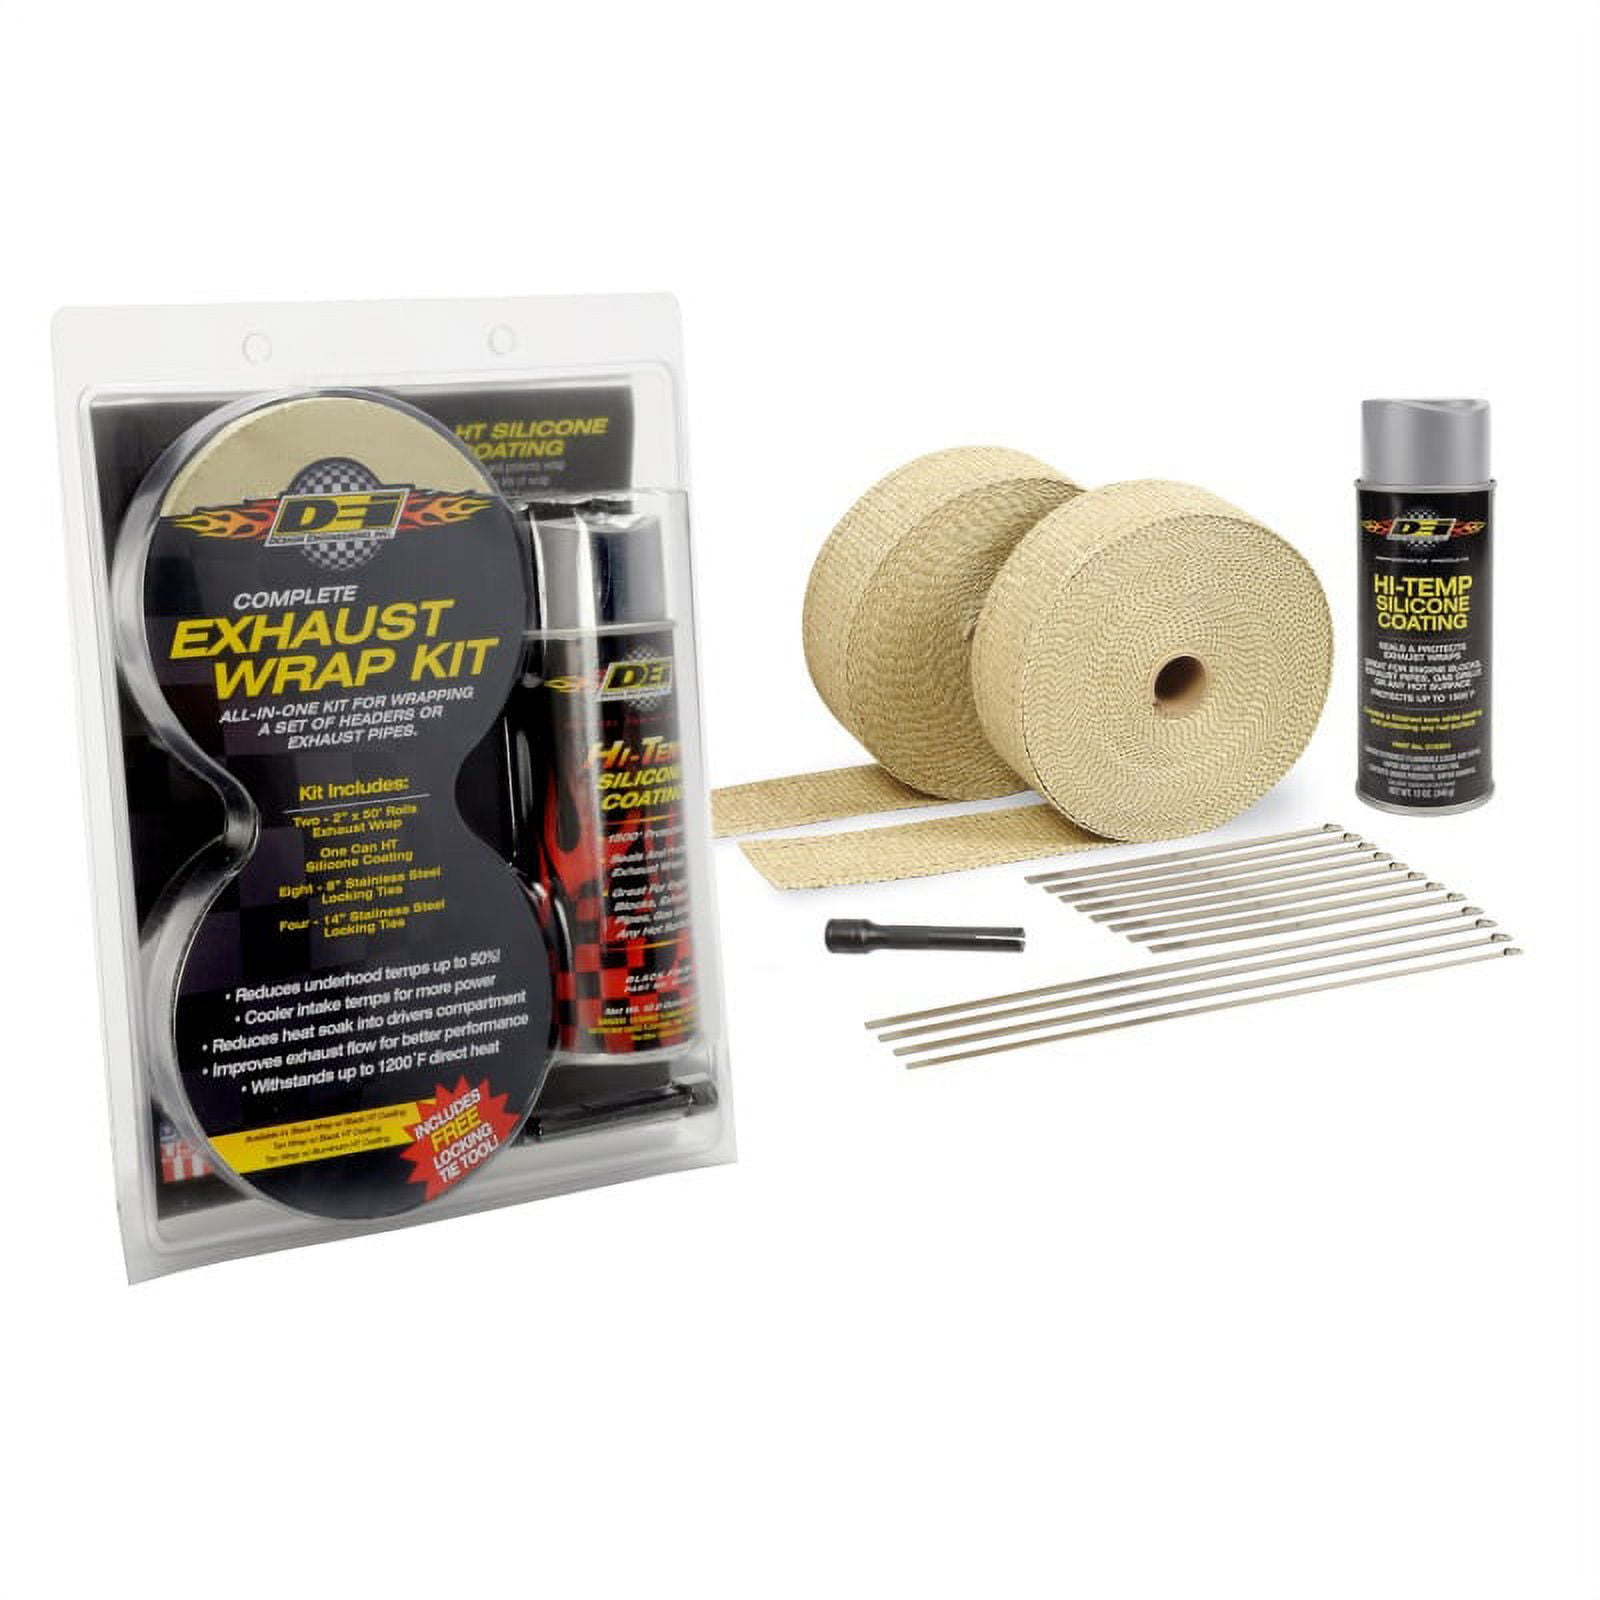  Duall-88 Leather Adhesive, 4 oz. can - RH Adhesives